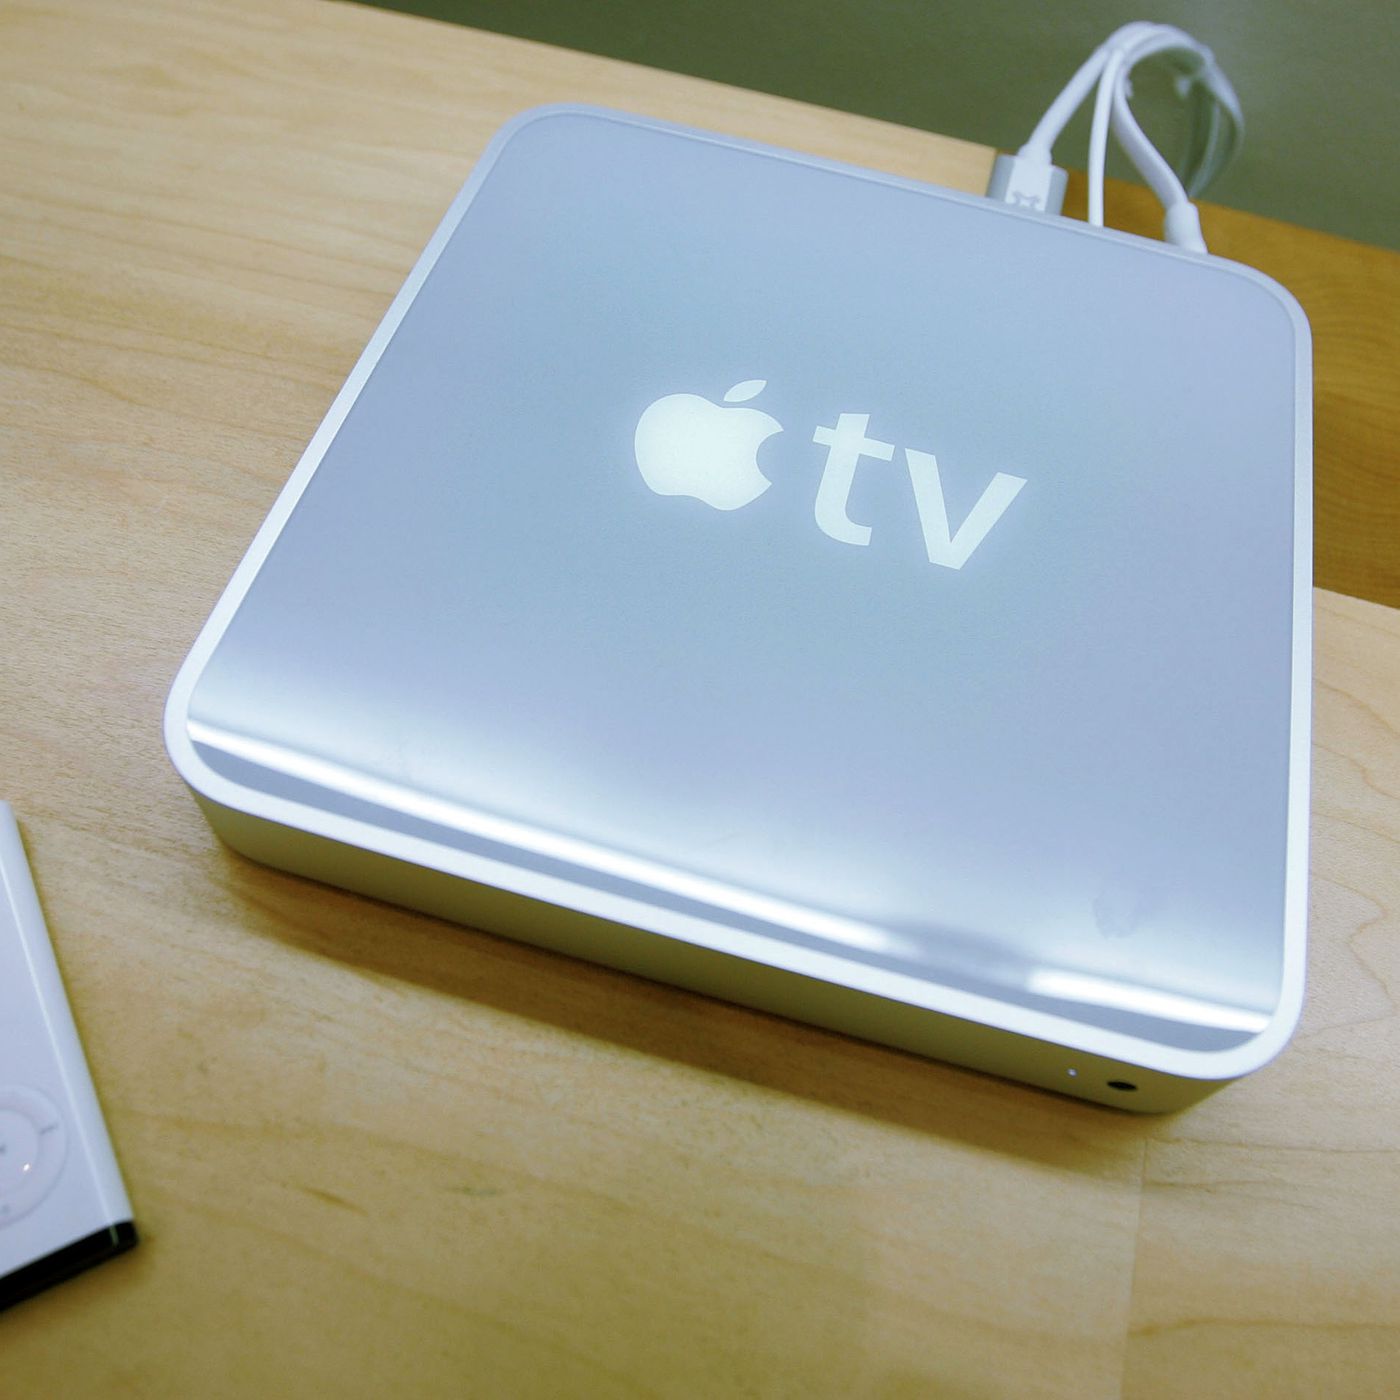 Apple will disconnect 'obsolete' first-gen Apple TV from iTunes in 